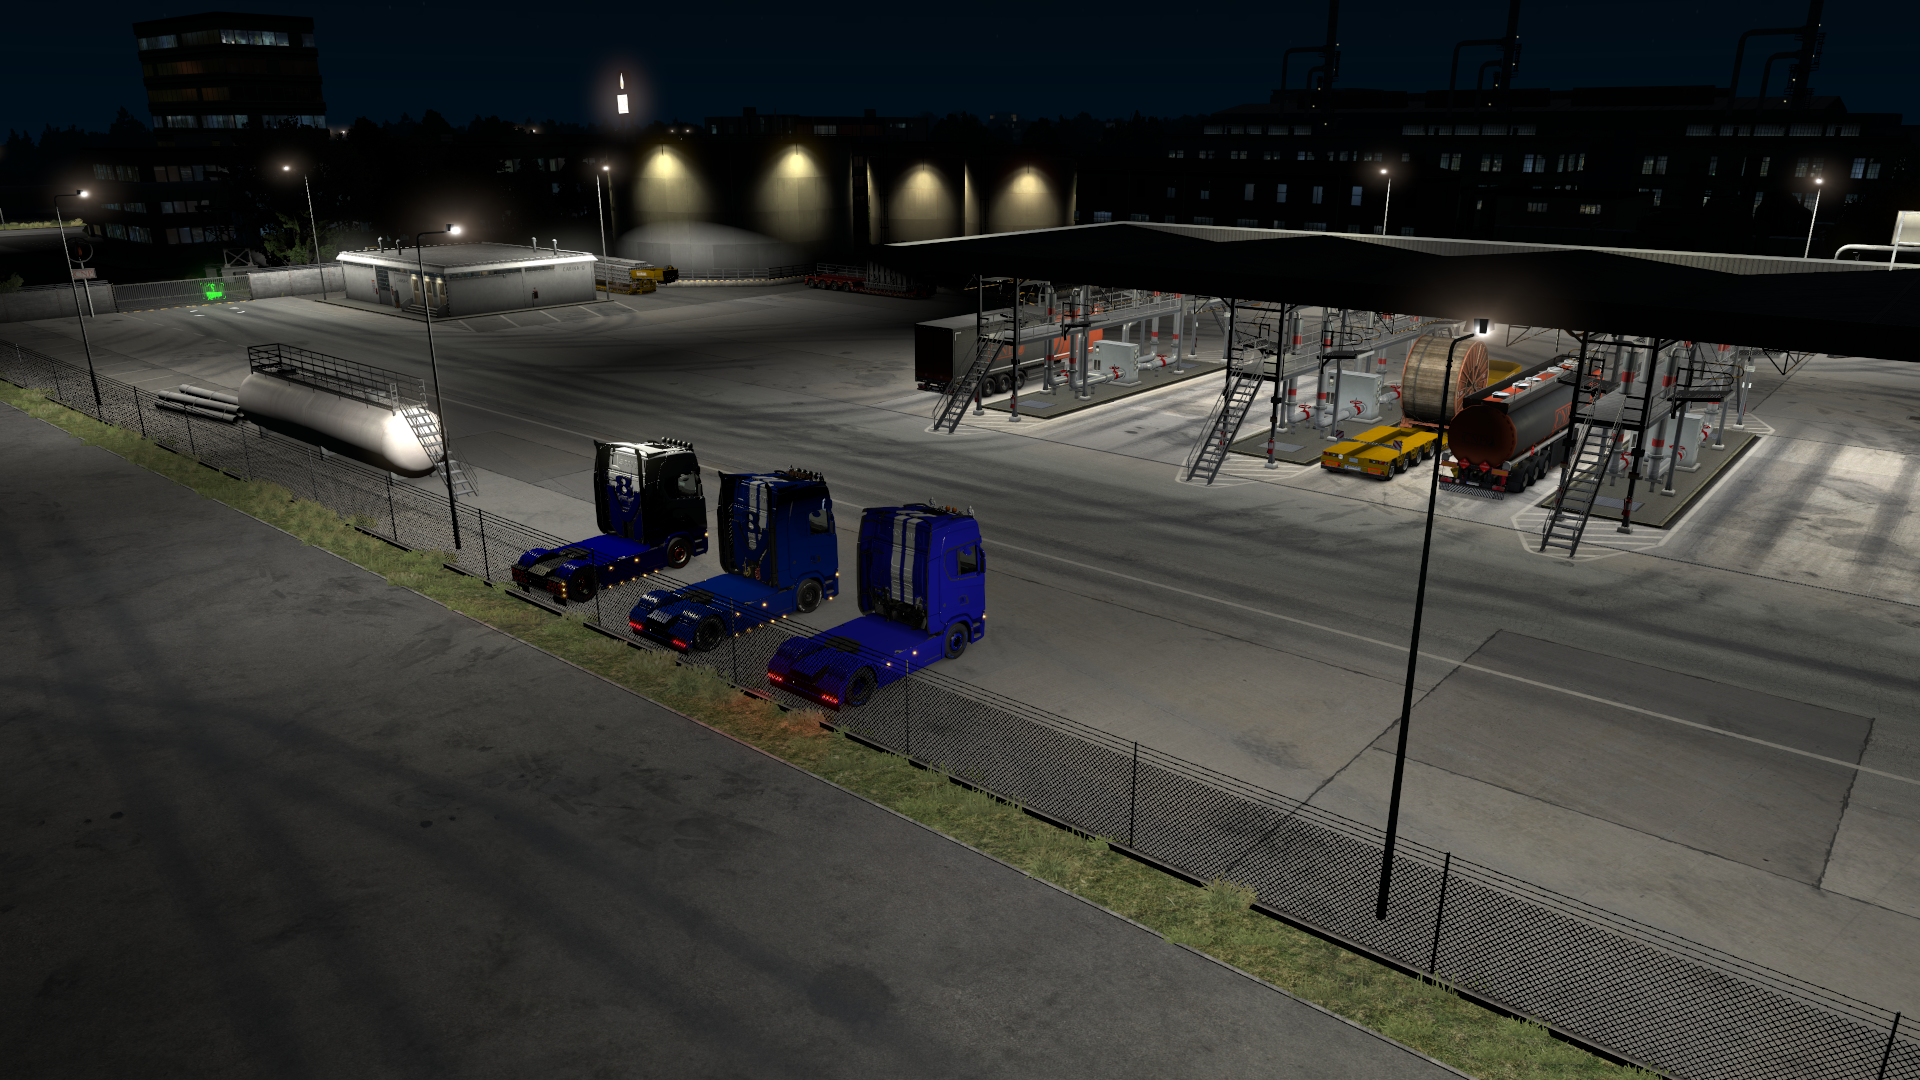 ets2_20200310_215537_00.png